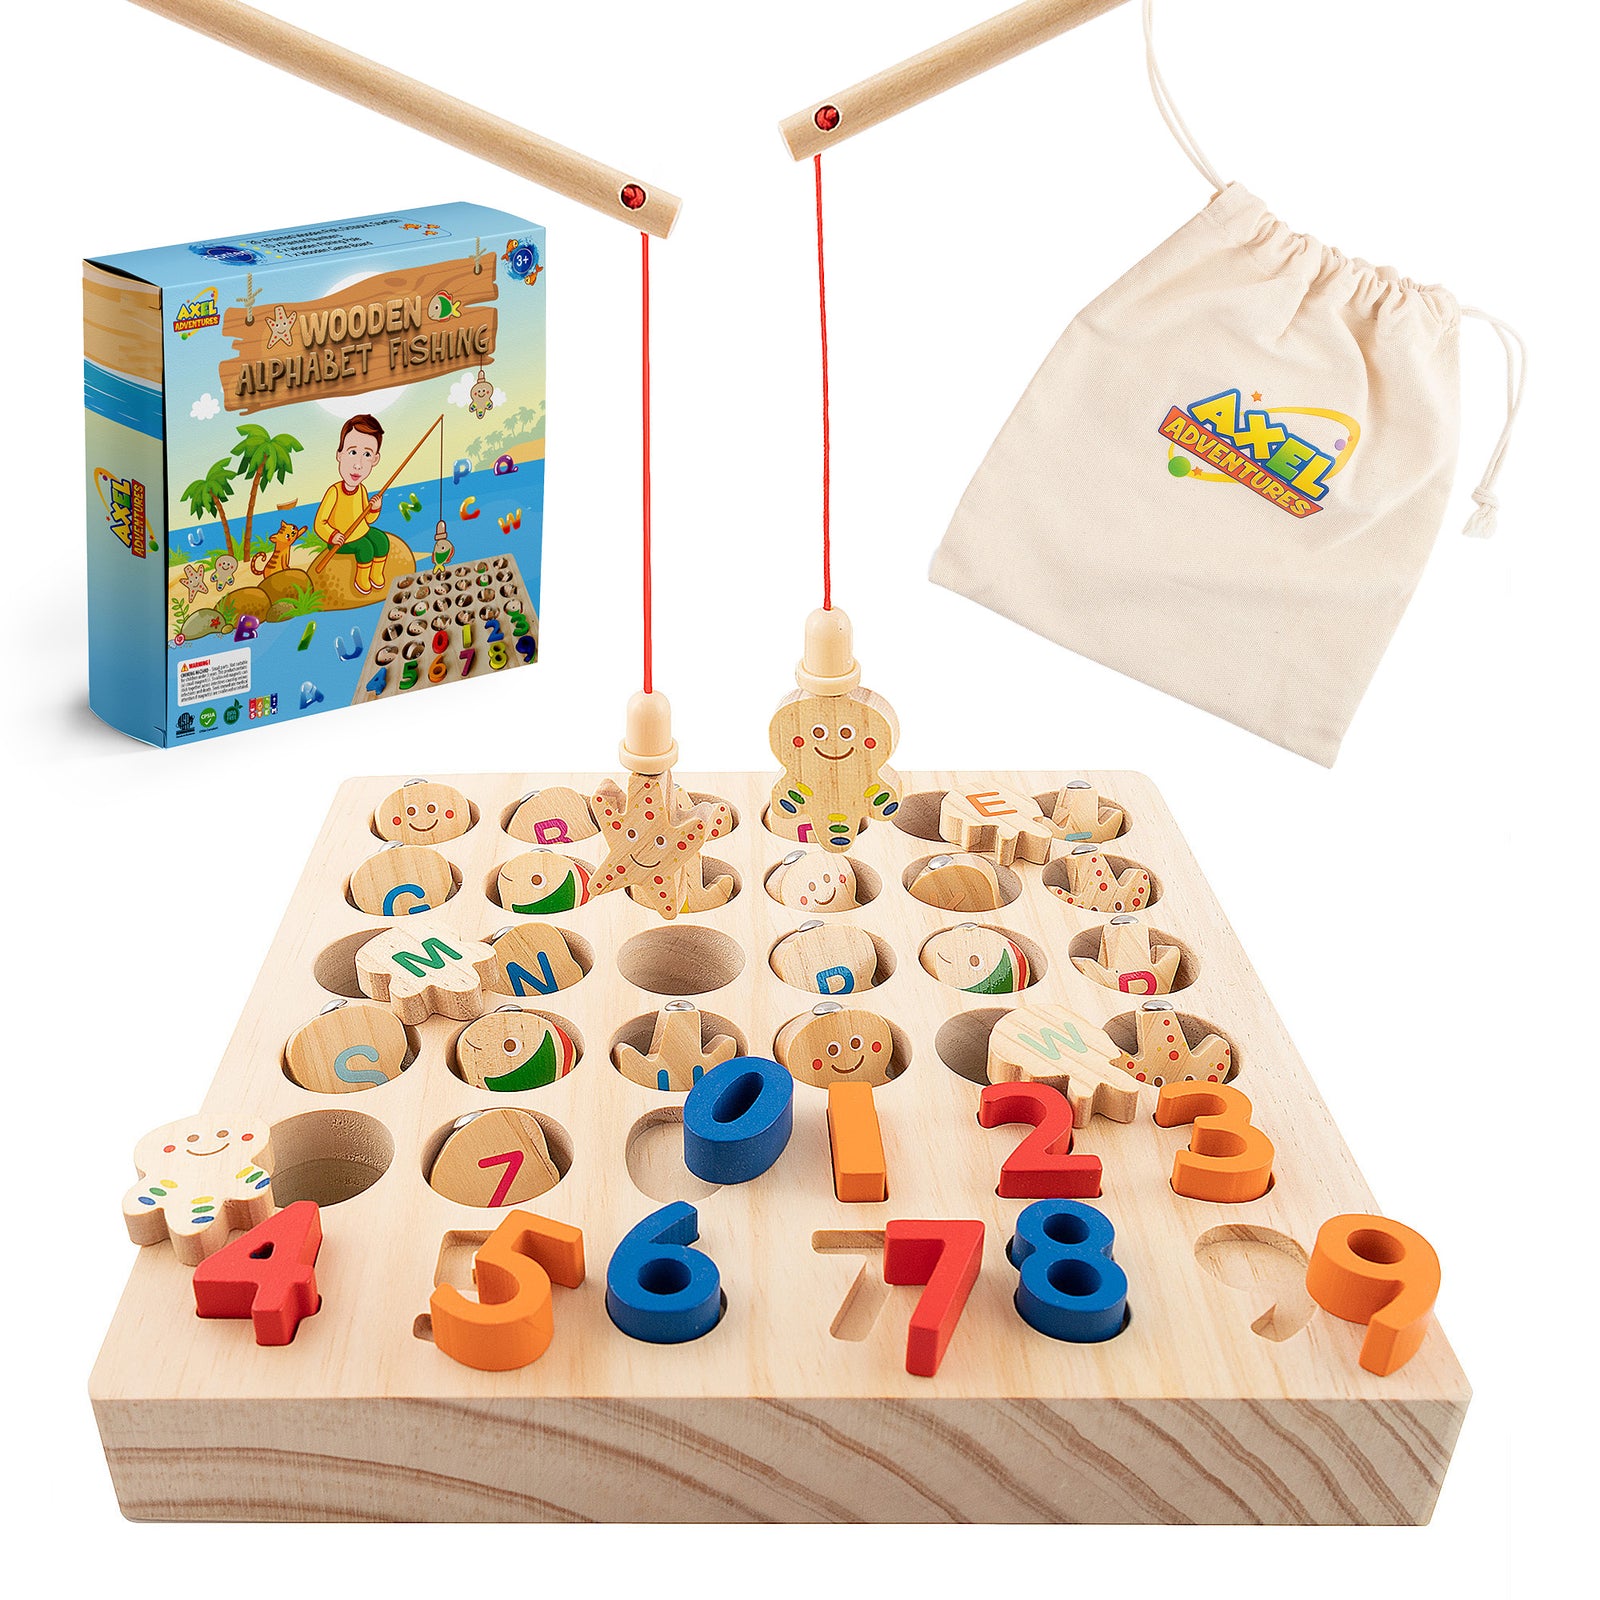 Magnetic Fishing Game - ABC Learning for Toddlers with Wood Toy Fishing  Poles & Fish - Montessori Toys to Develop Fine Motor Skills - Gift Idea for